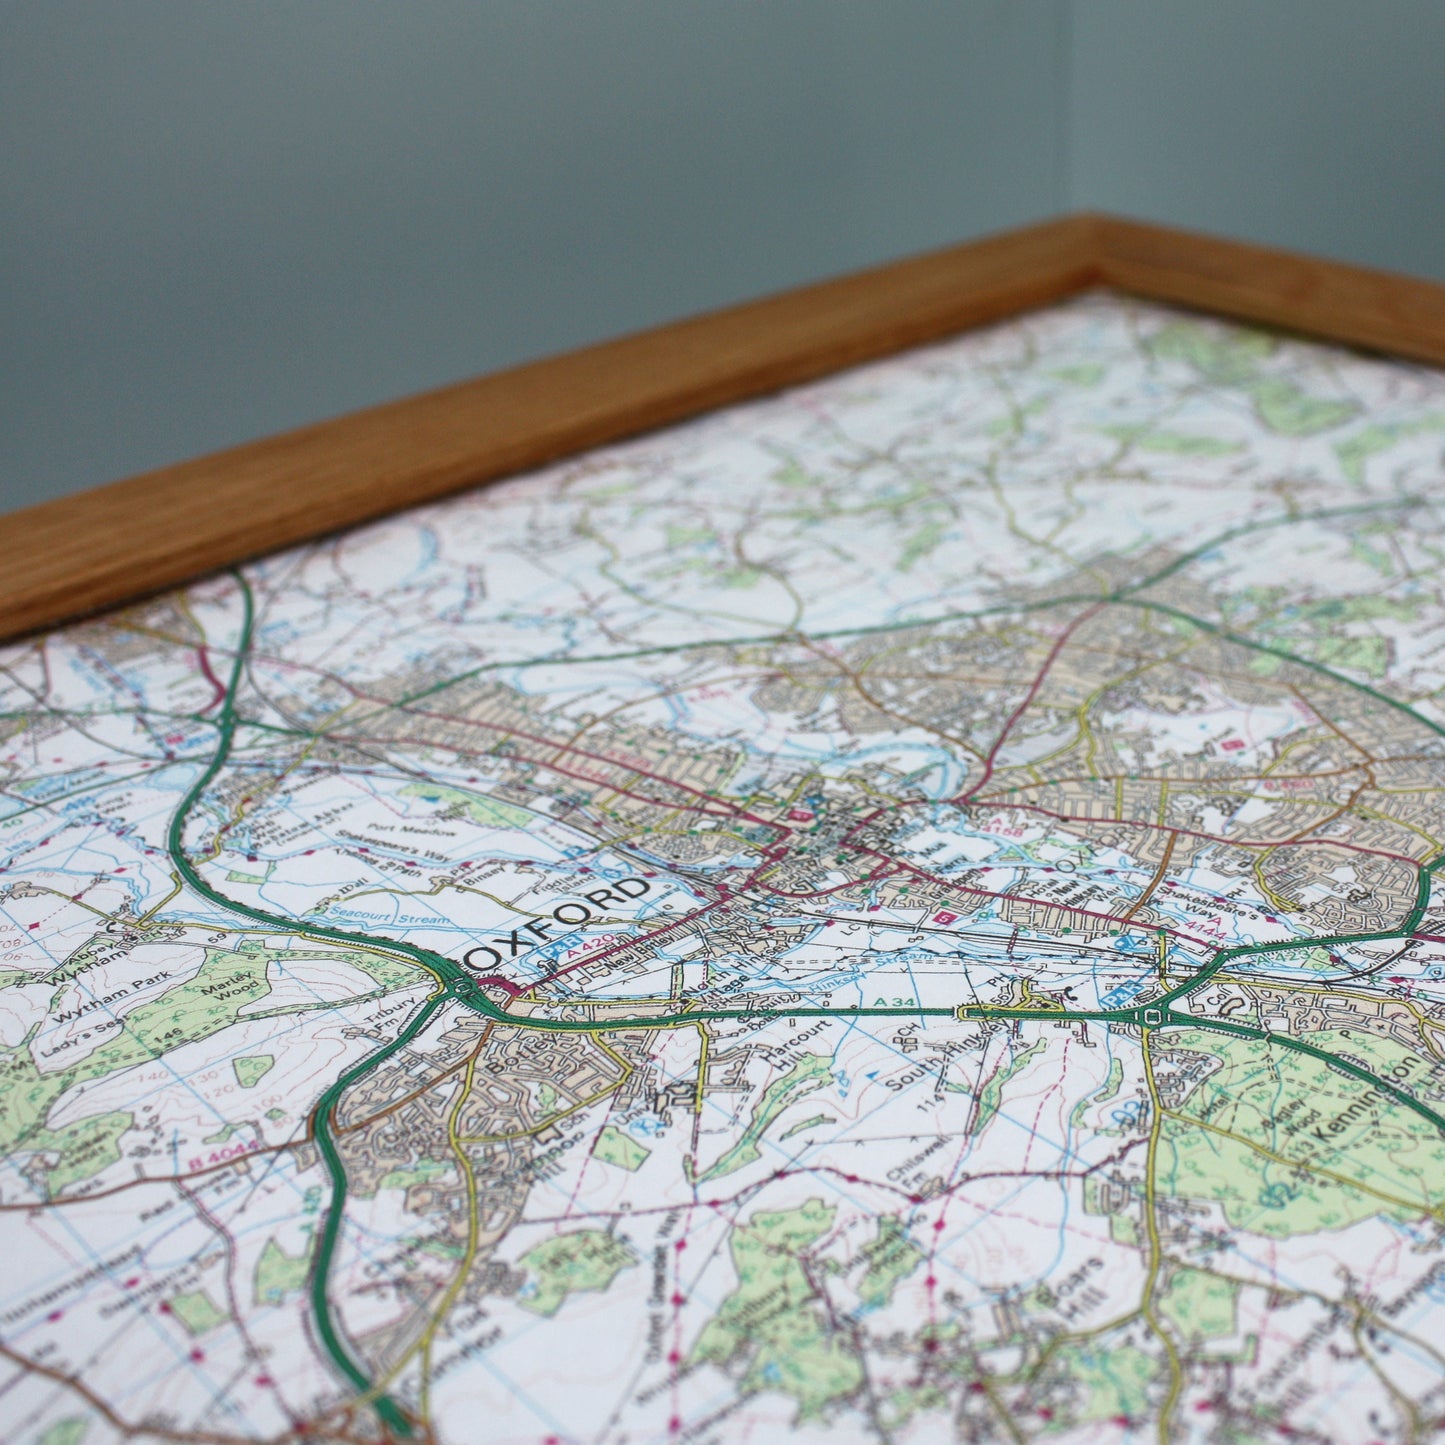 Personalised Map Coffee Table